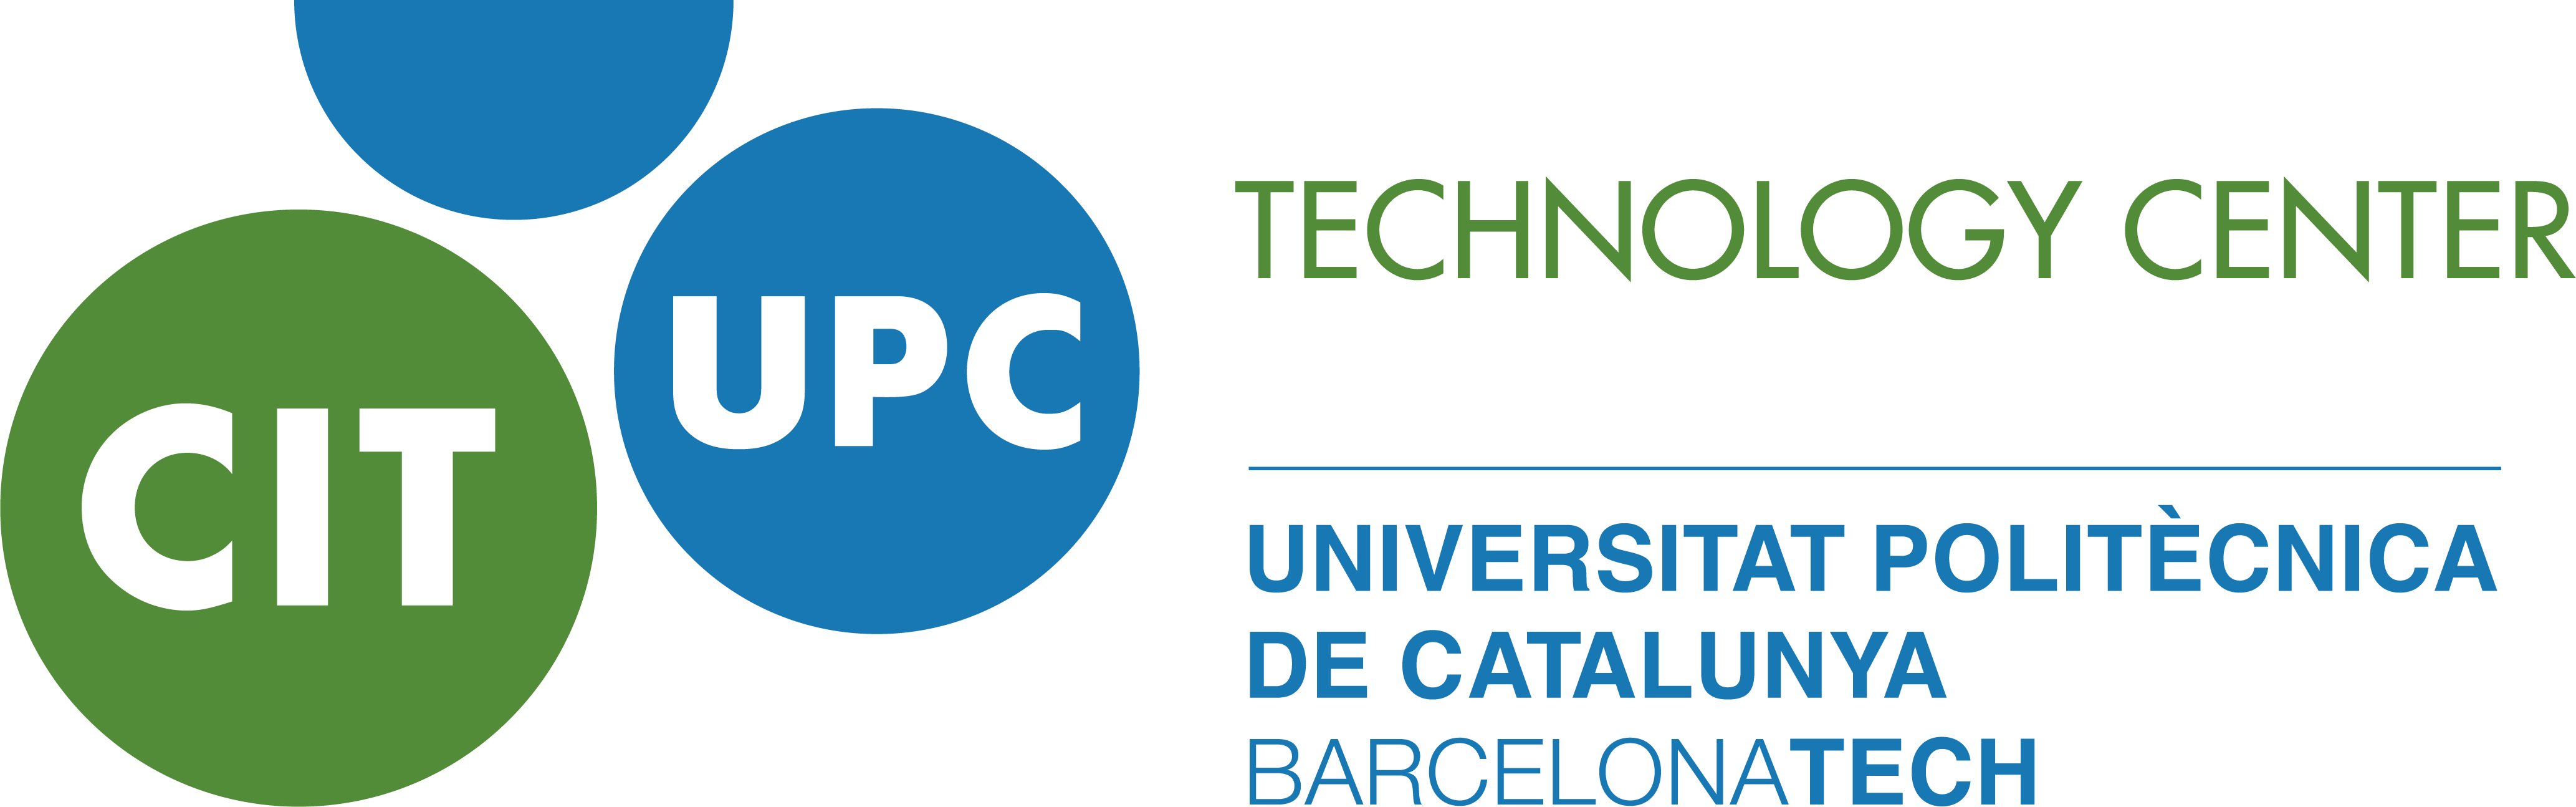 The Scientific Research Awards recognise four UPC research projects to face the challenges of COVID-19 in Barcelona